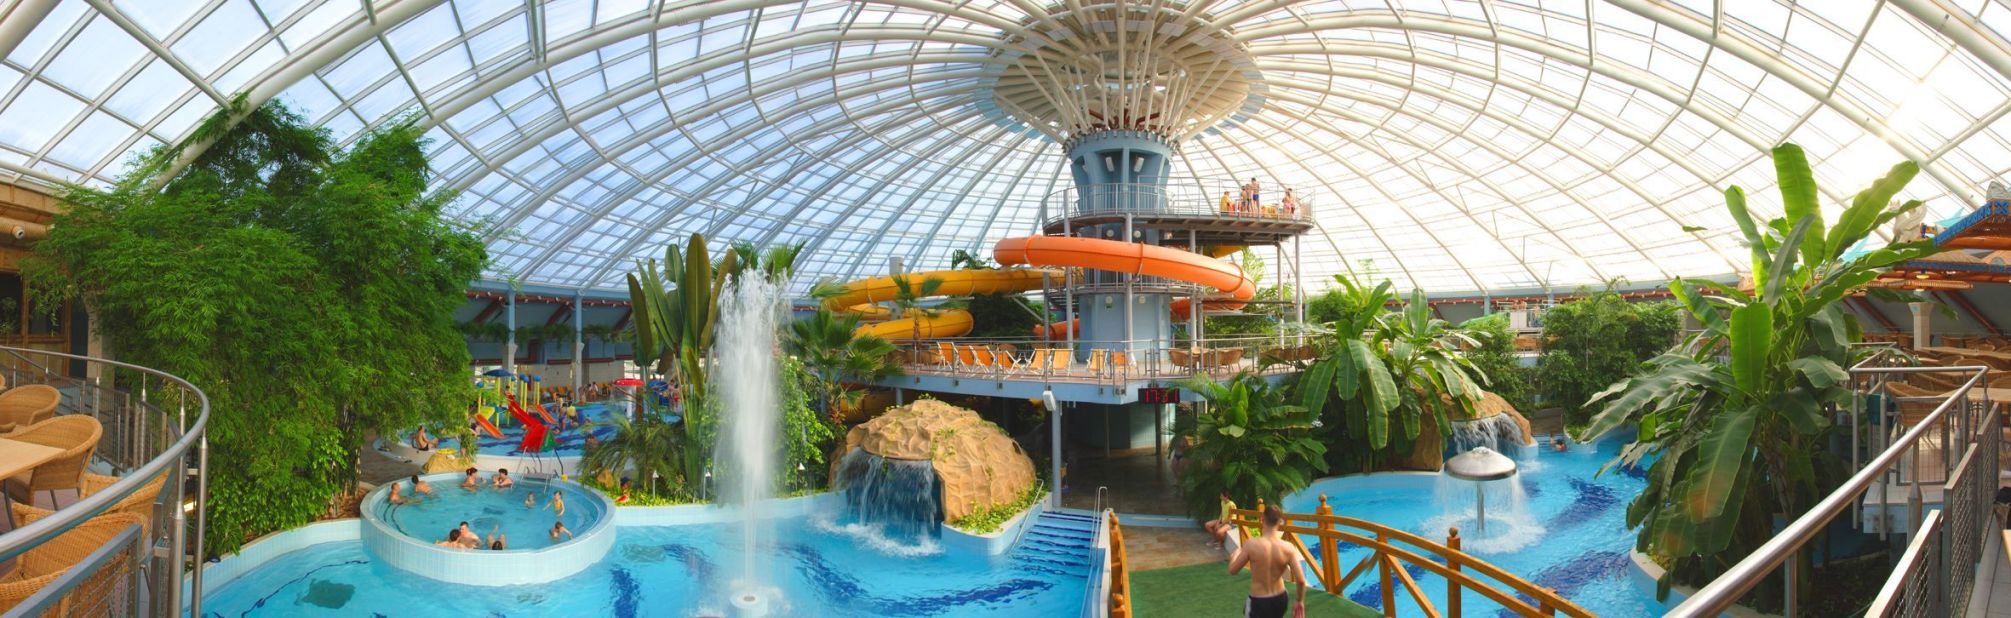 In a forest just outside Debrecen, the venue of this year's Hungarian National Water-Chute Championships is also home to a popular thermal spa.